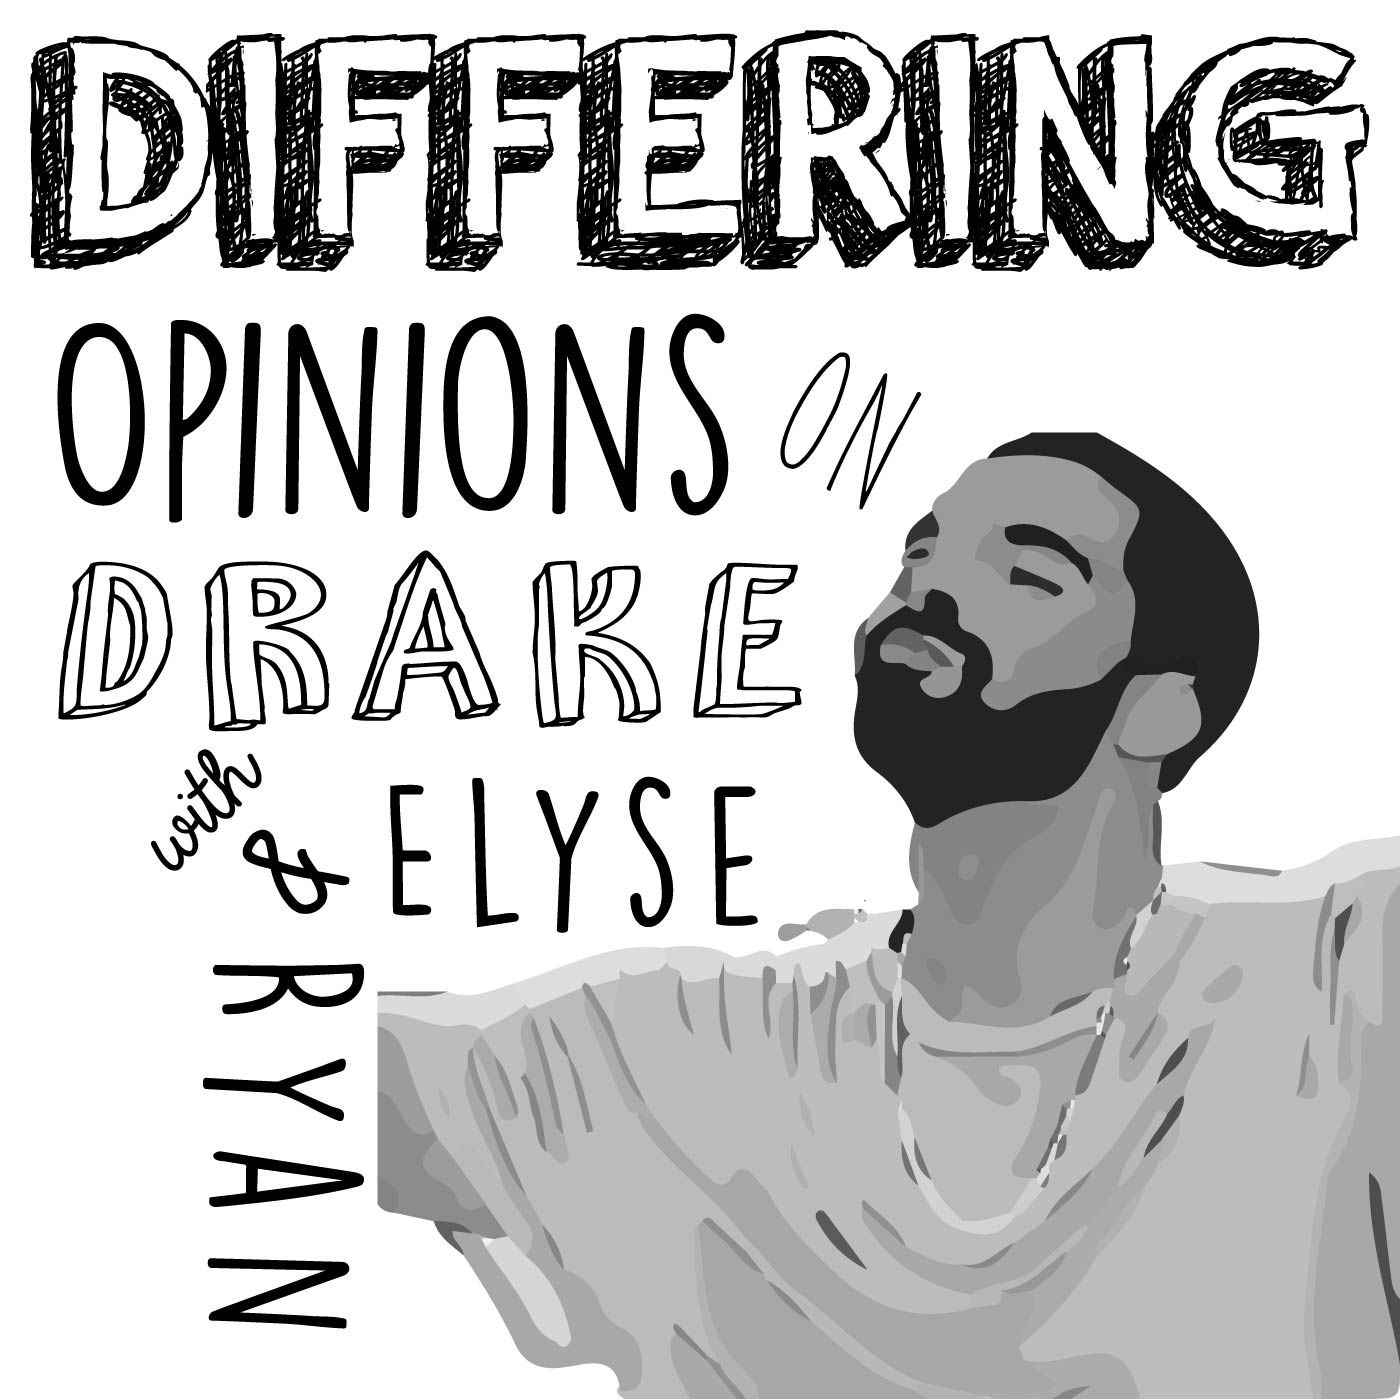 Differing Opinions on Drake